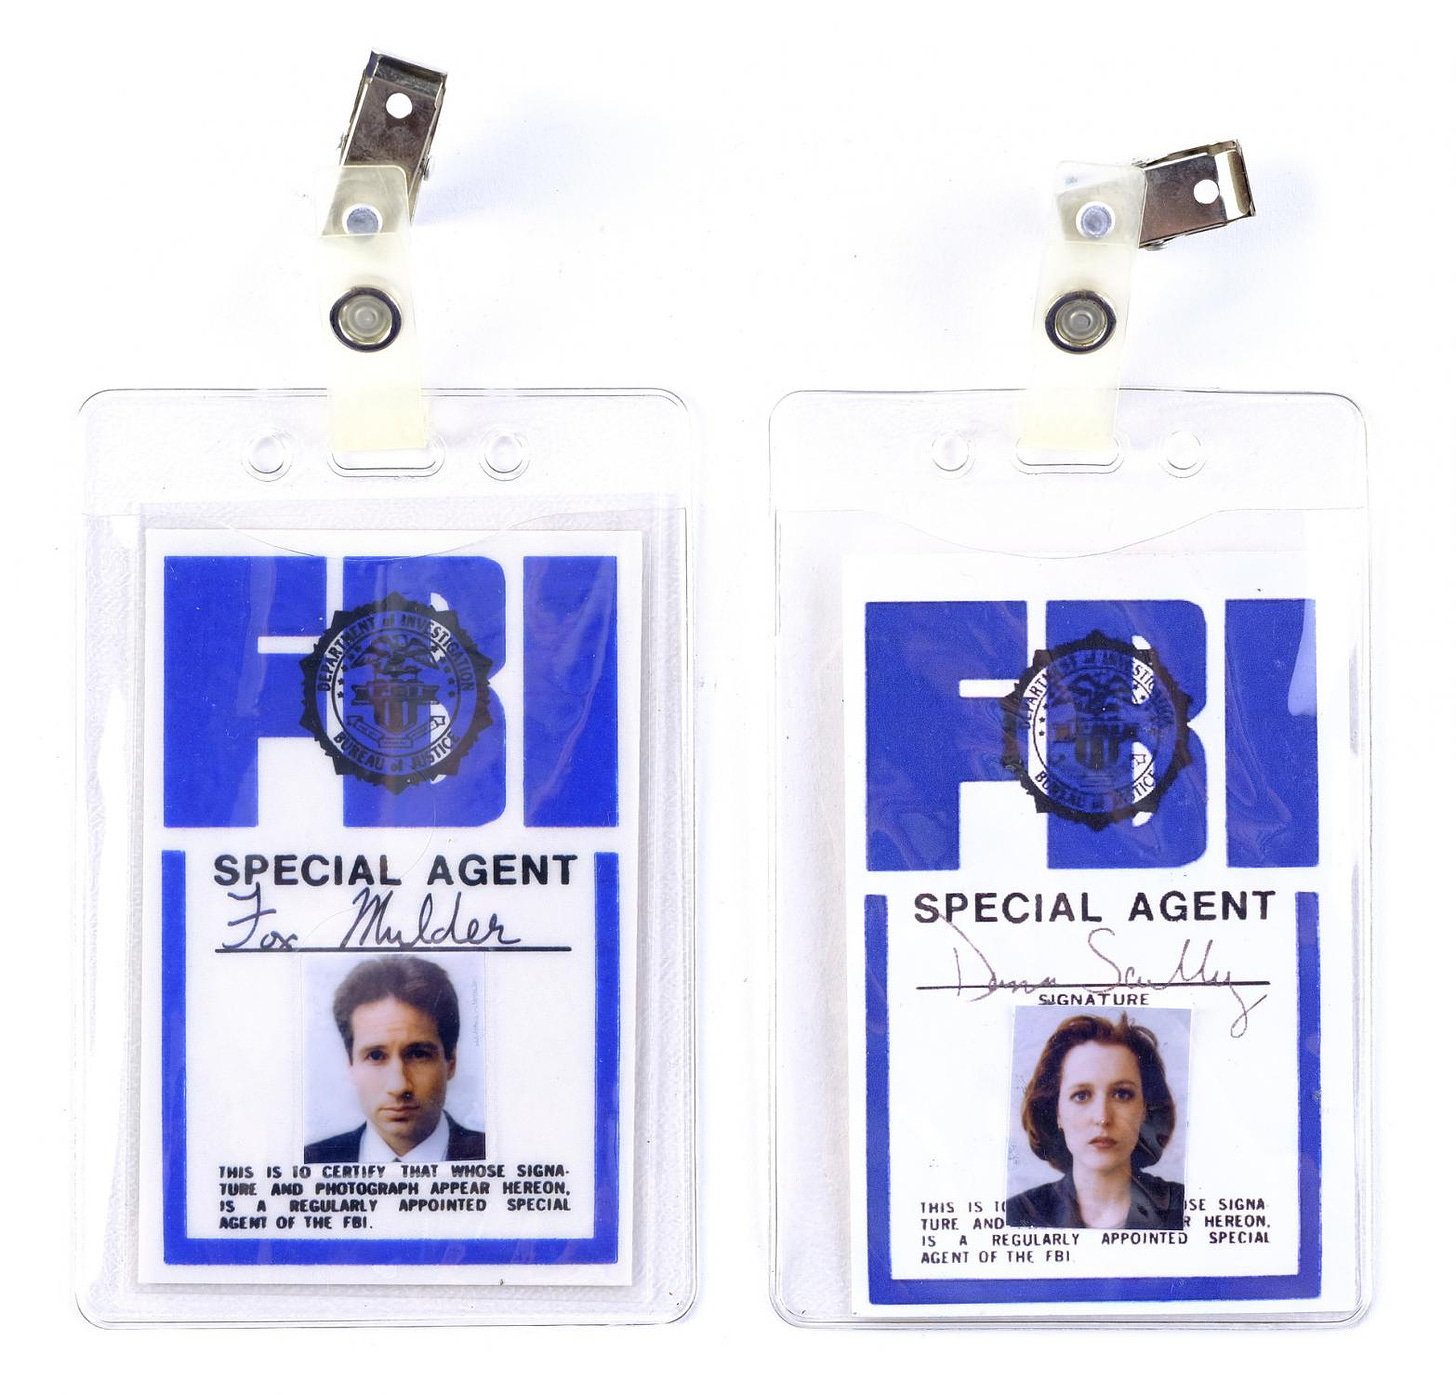 Lot #404 - THE X-FILES (T.V. SERIES, 1993 - 2018) - Dana Scully (Gillian  Anderson) and Fox Mulder's (David Duchovny) FBI ID Badges